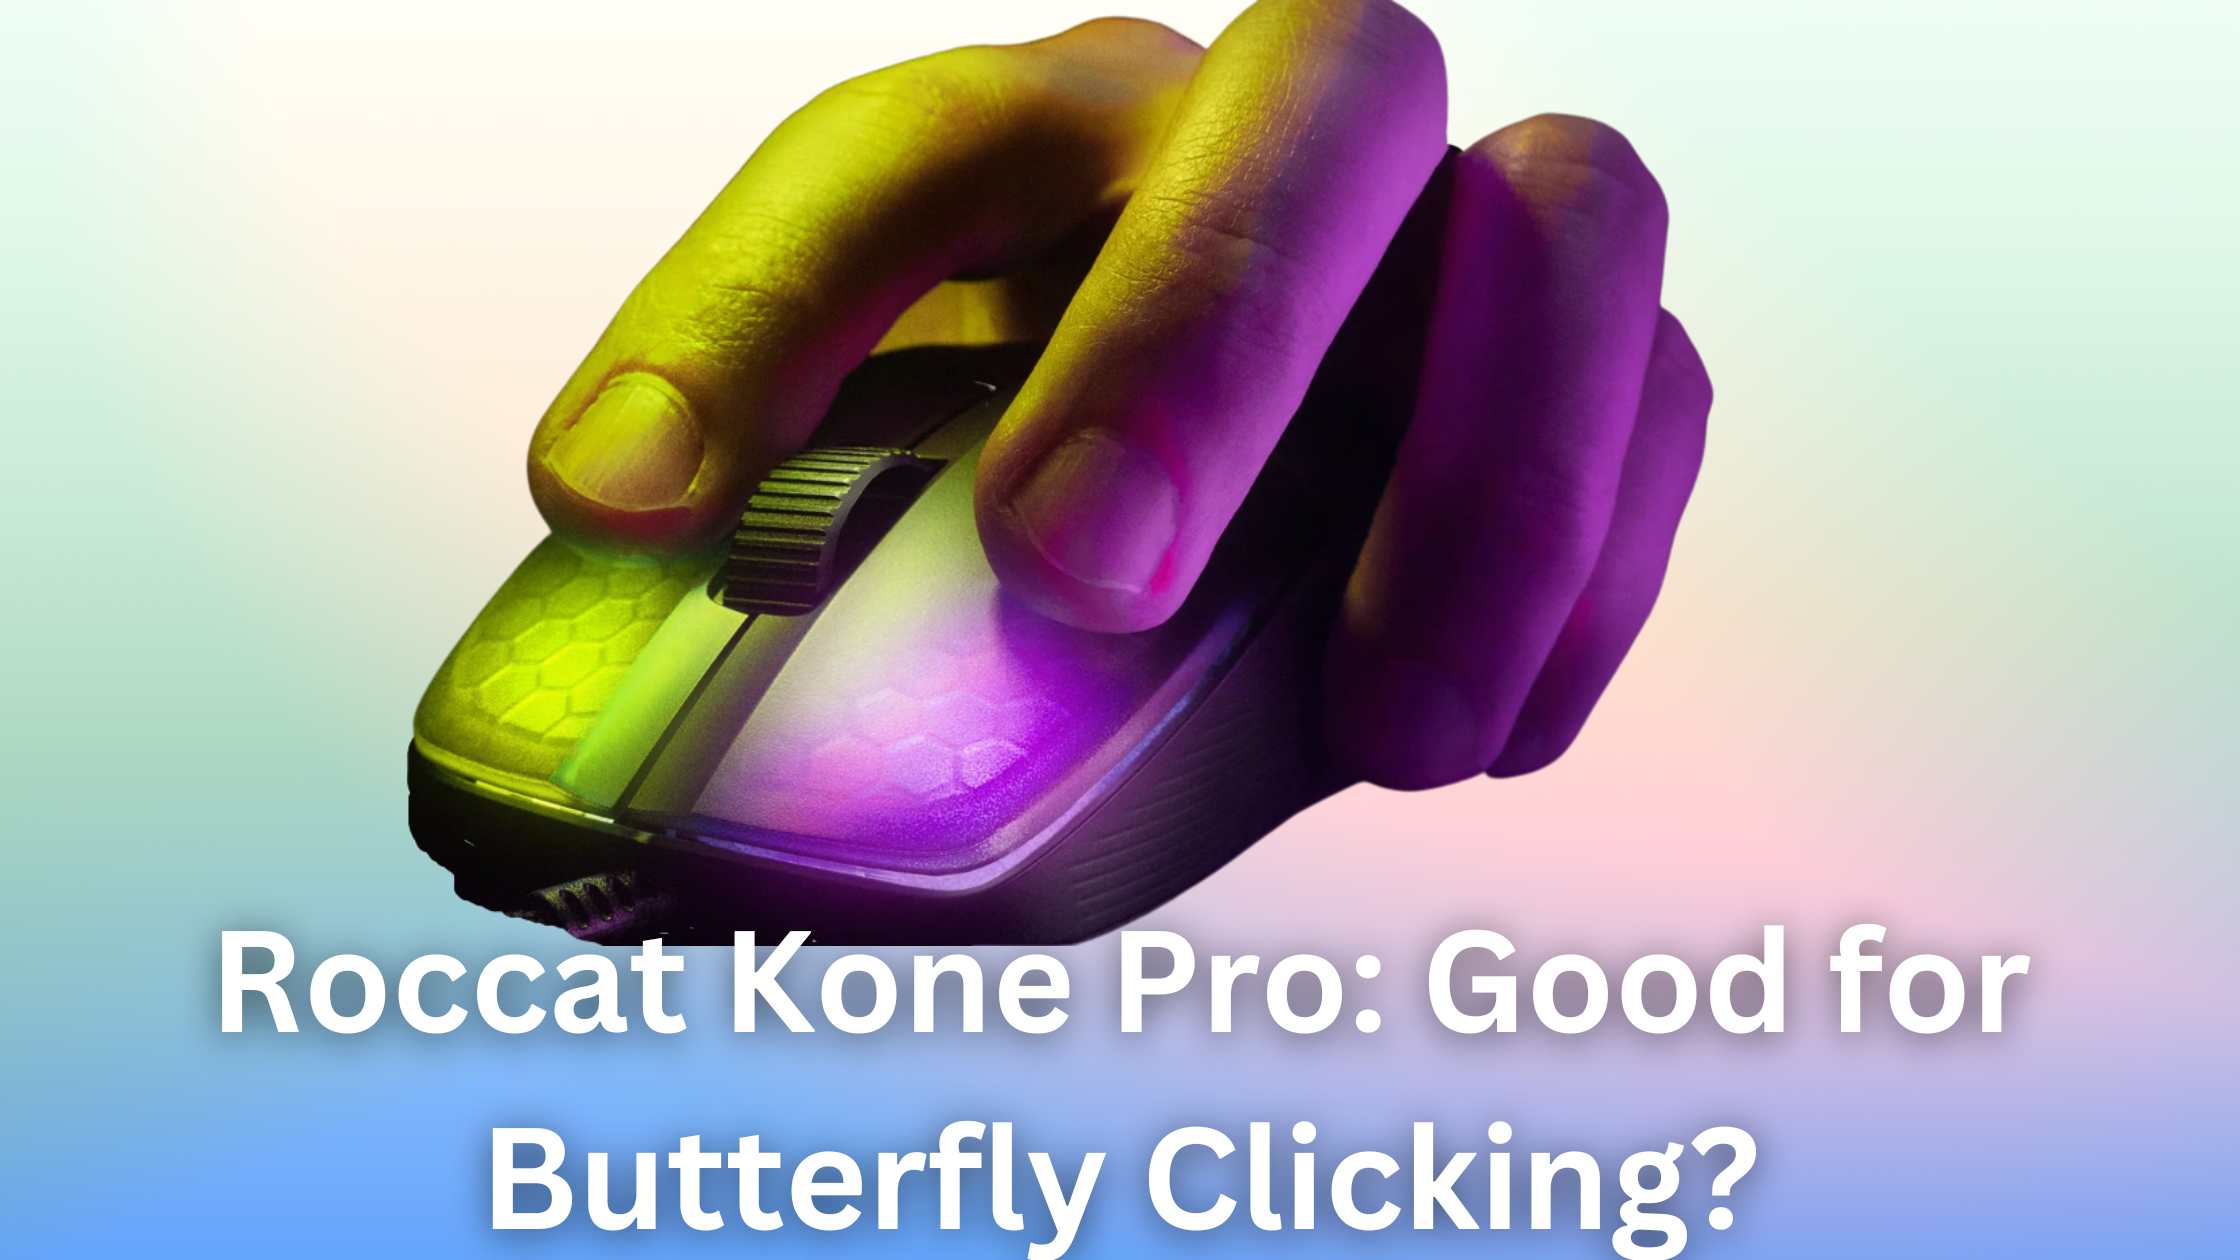 Is The Roccat Kone Pro Good For Butterfly Clicking?